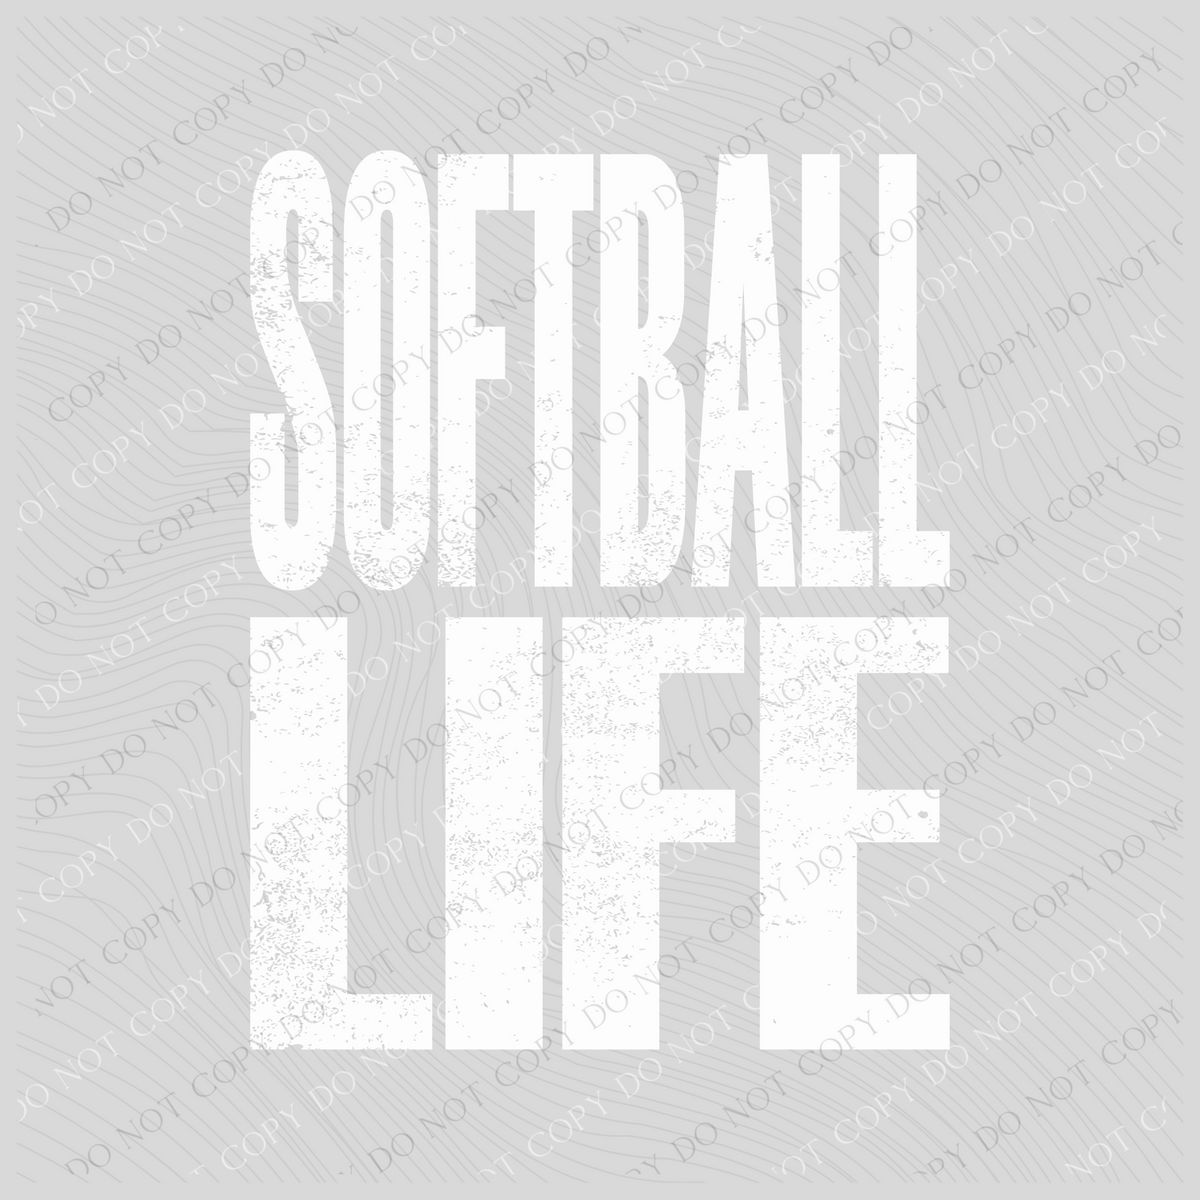 Softball Life Super Faded Distressed White Digital Design, PNG